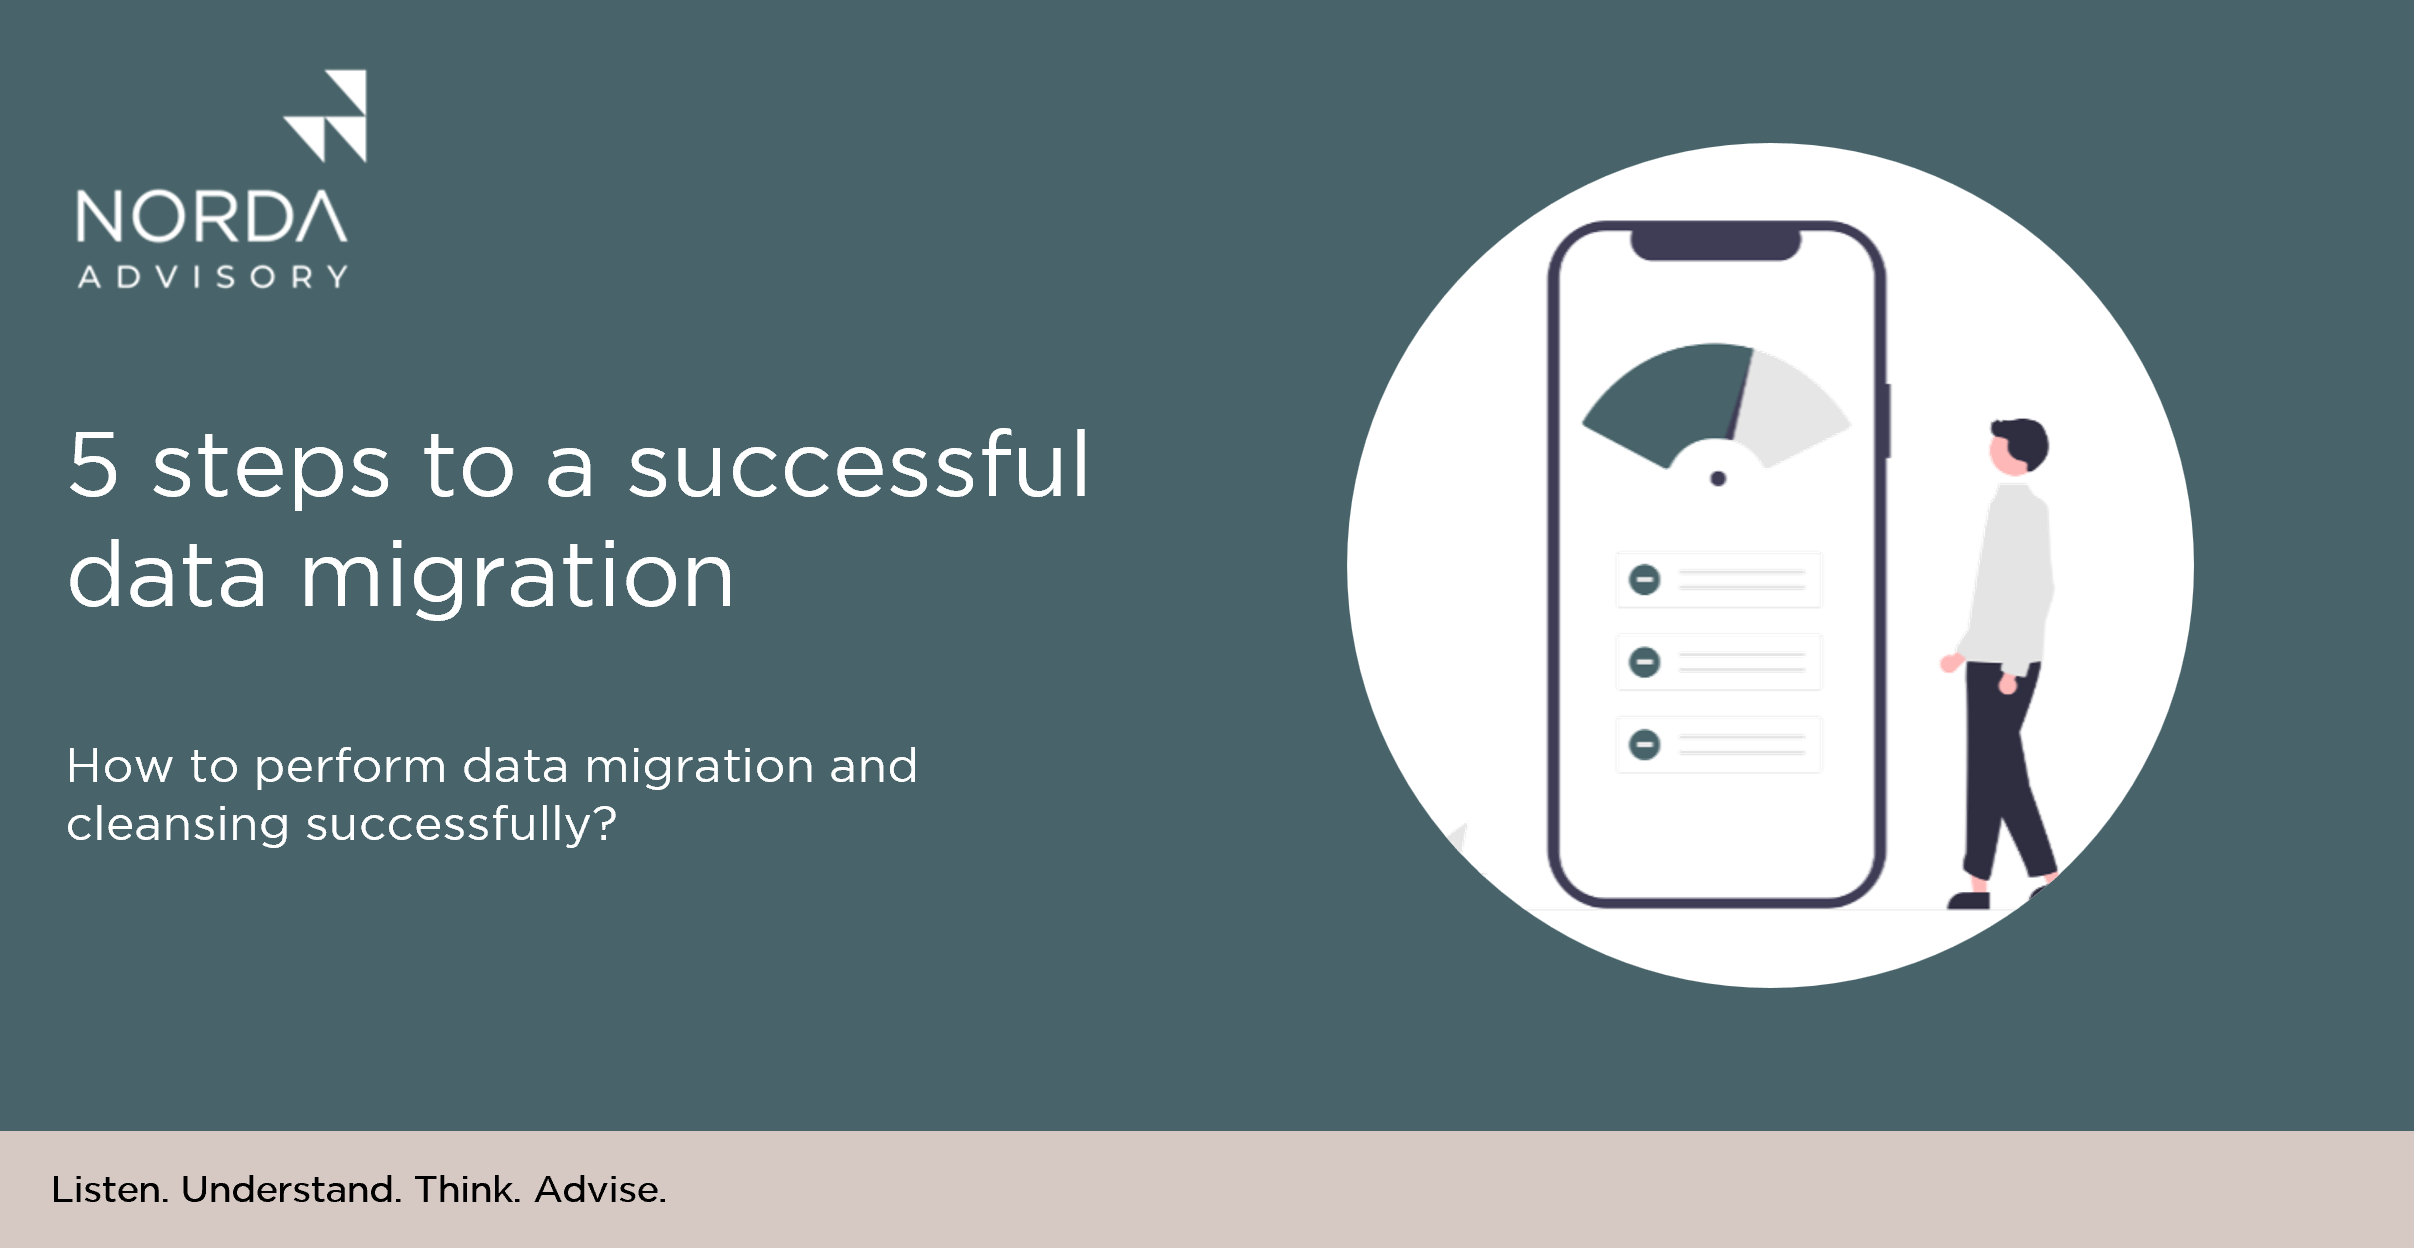 5 steps to a successful data migration